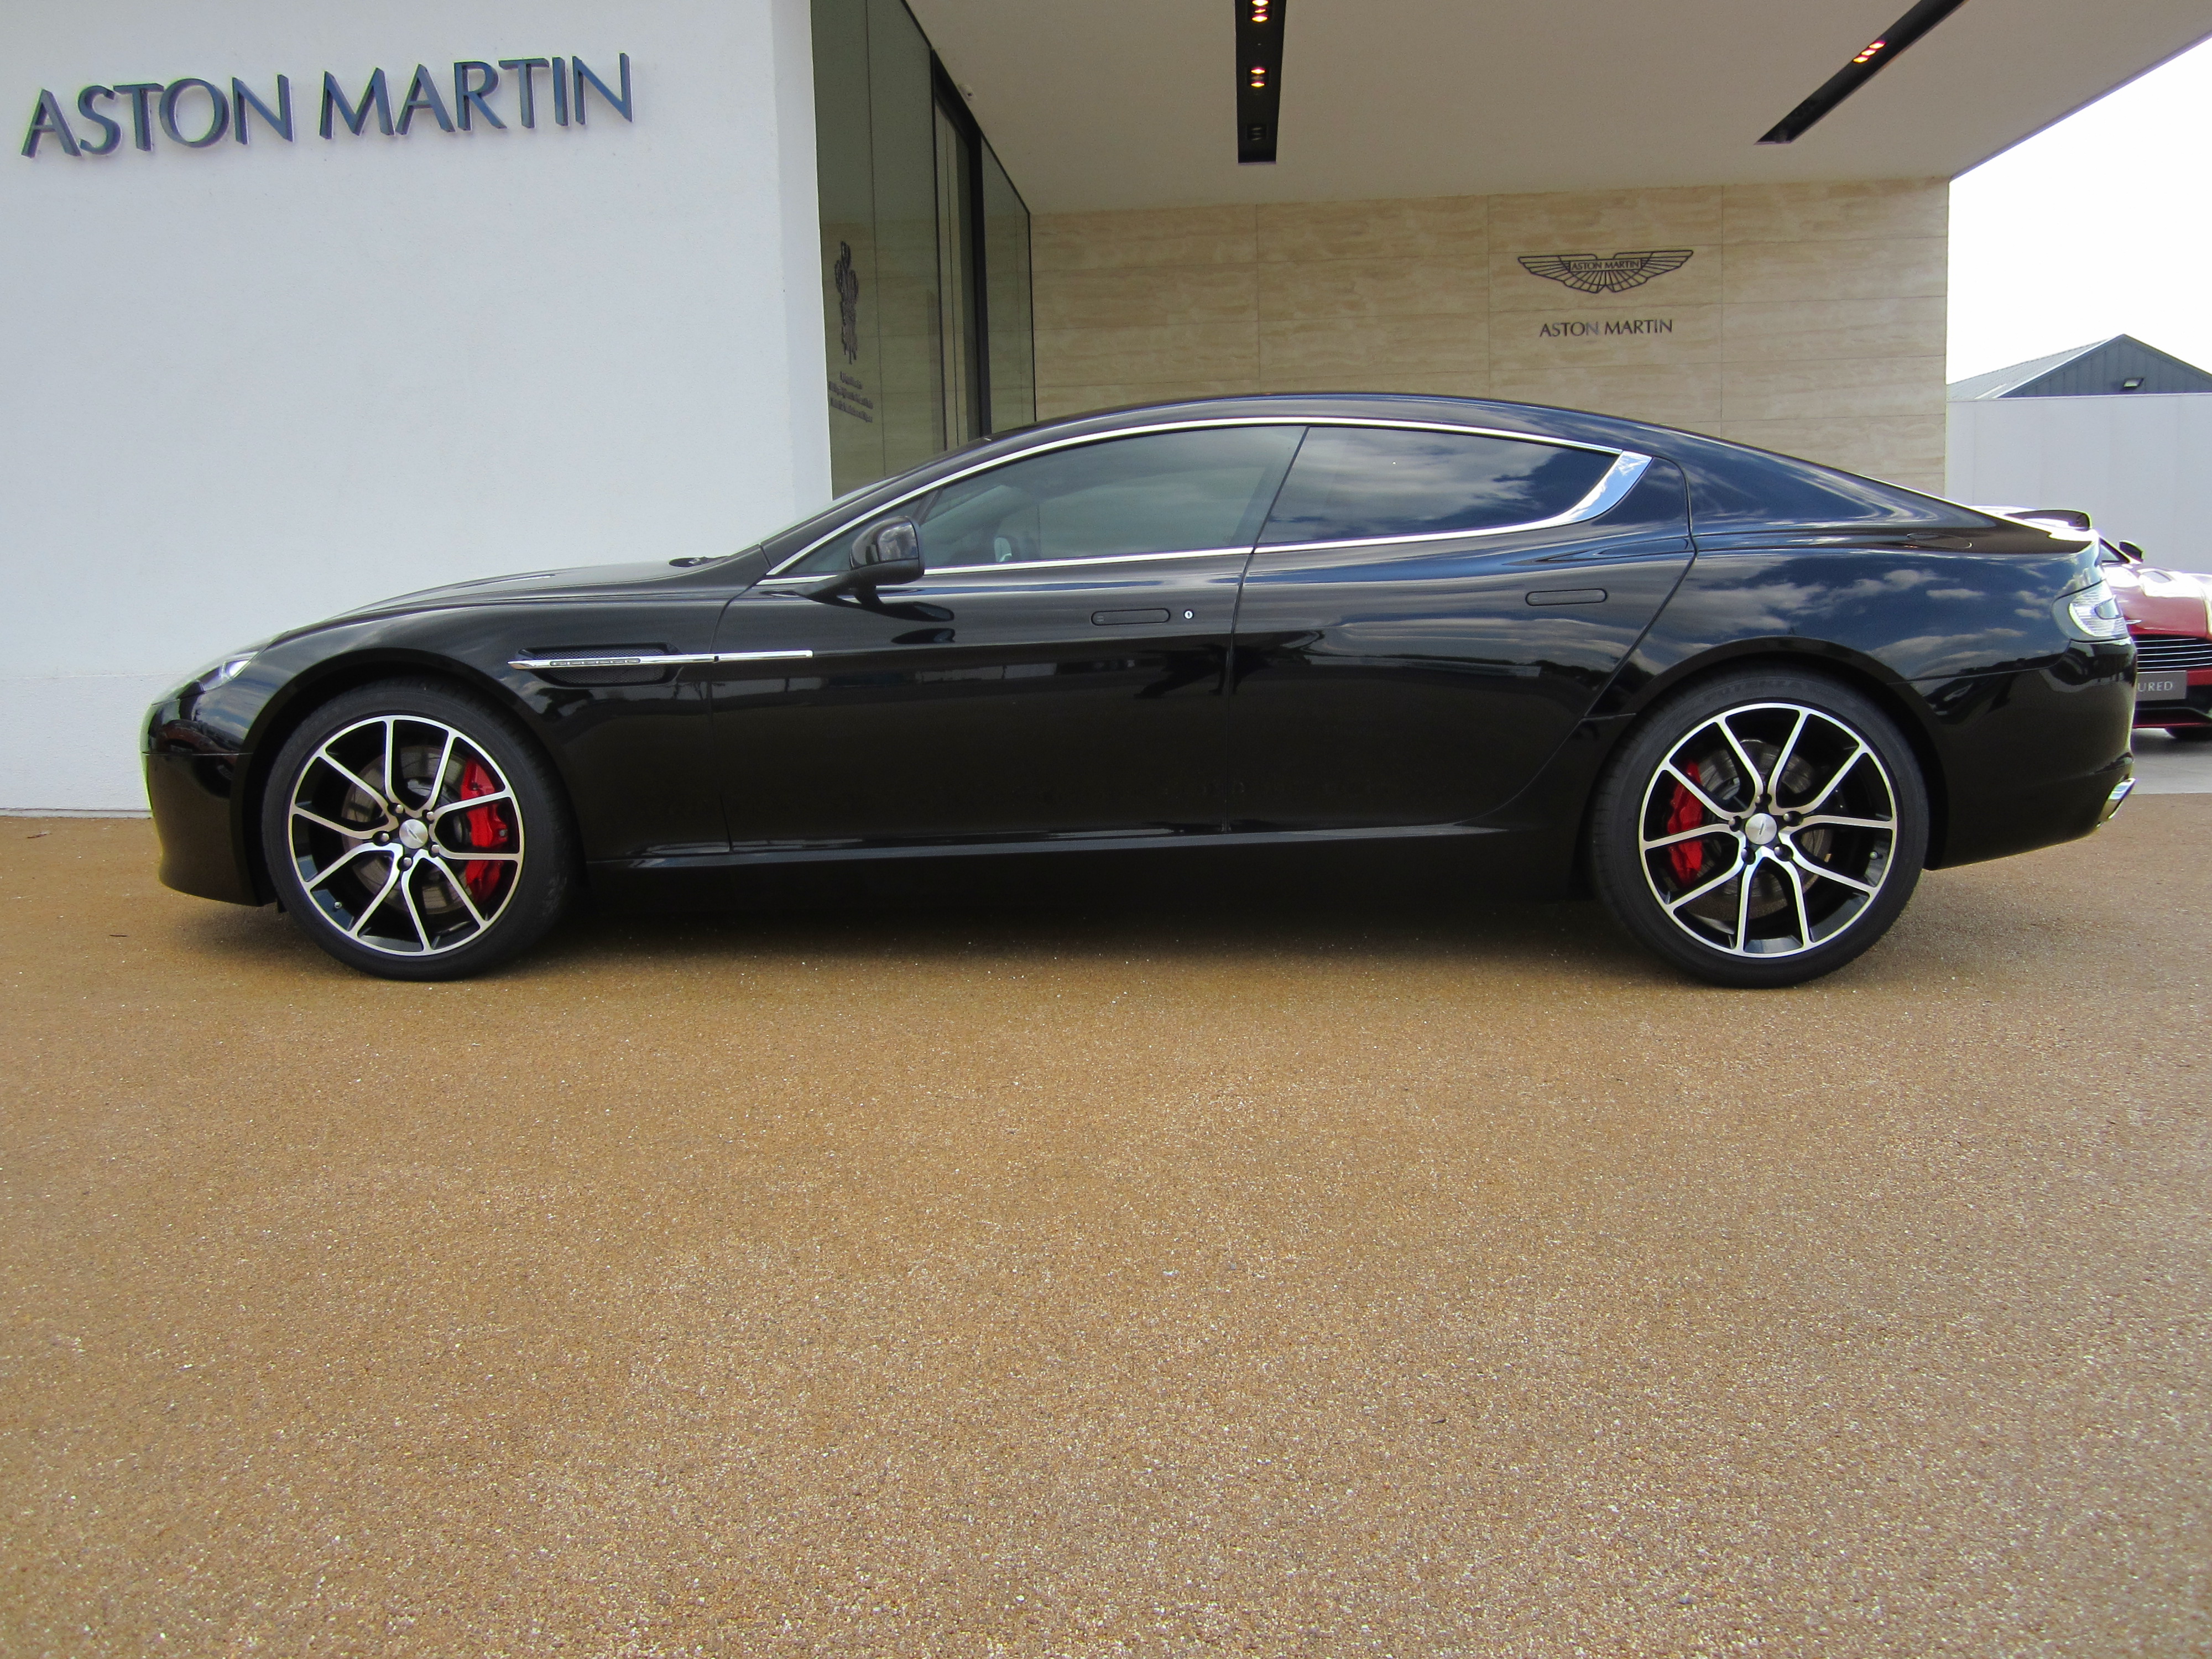 Aston Martin - Owners who have bought more than one car. - Page 6 - Aston Martin - PistonHeads